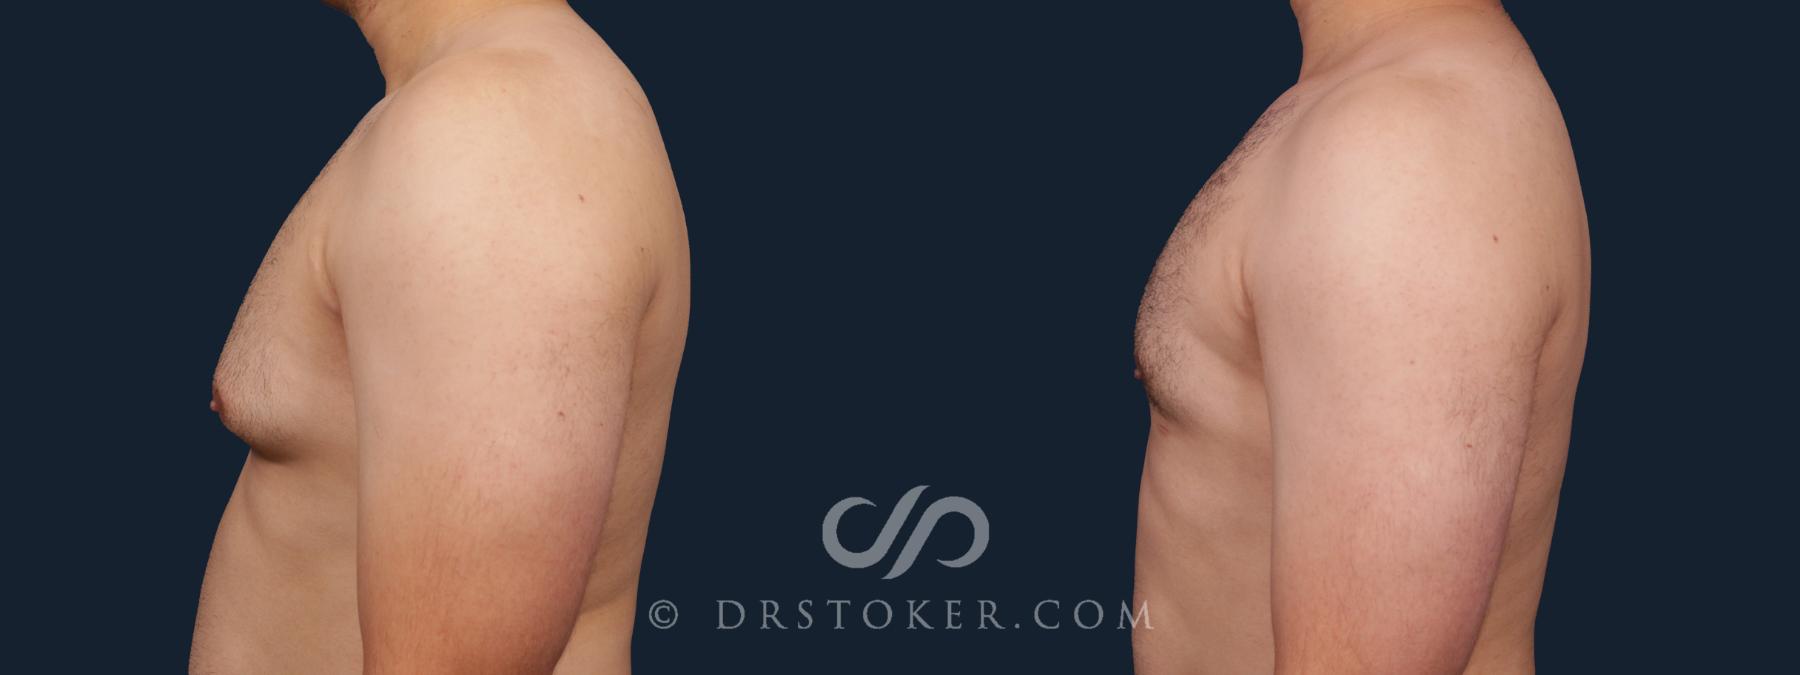 Before & After Breast Reduction for Men (Gynecomastia) Case 2177 Left Side View in Los Angeles, CA